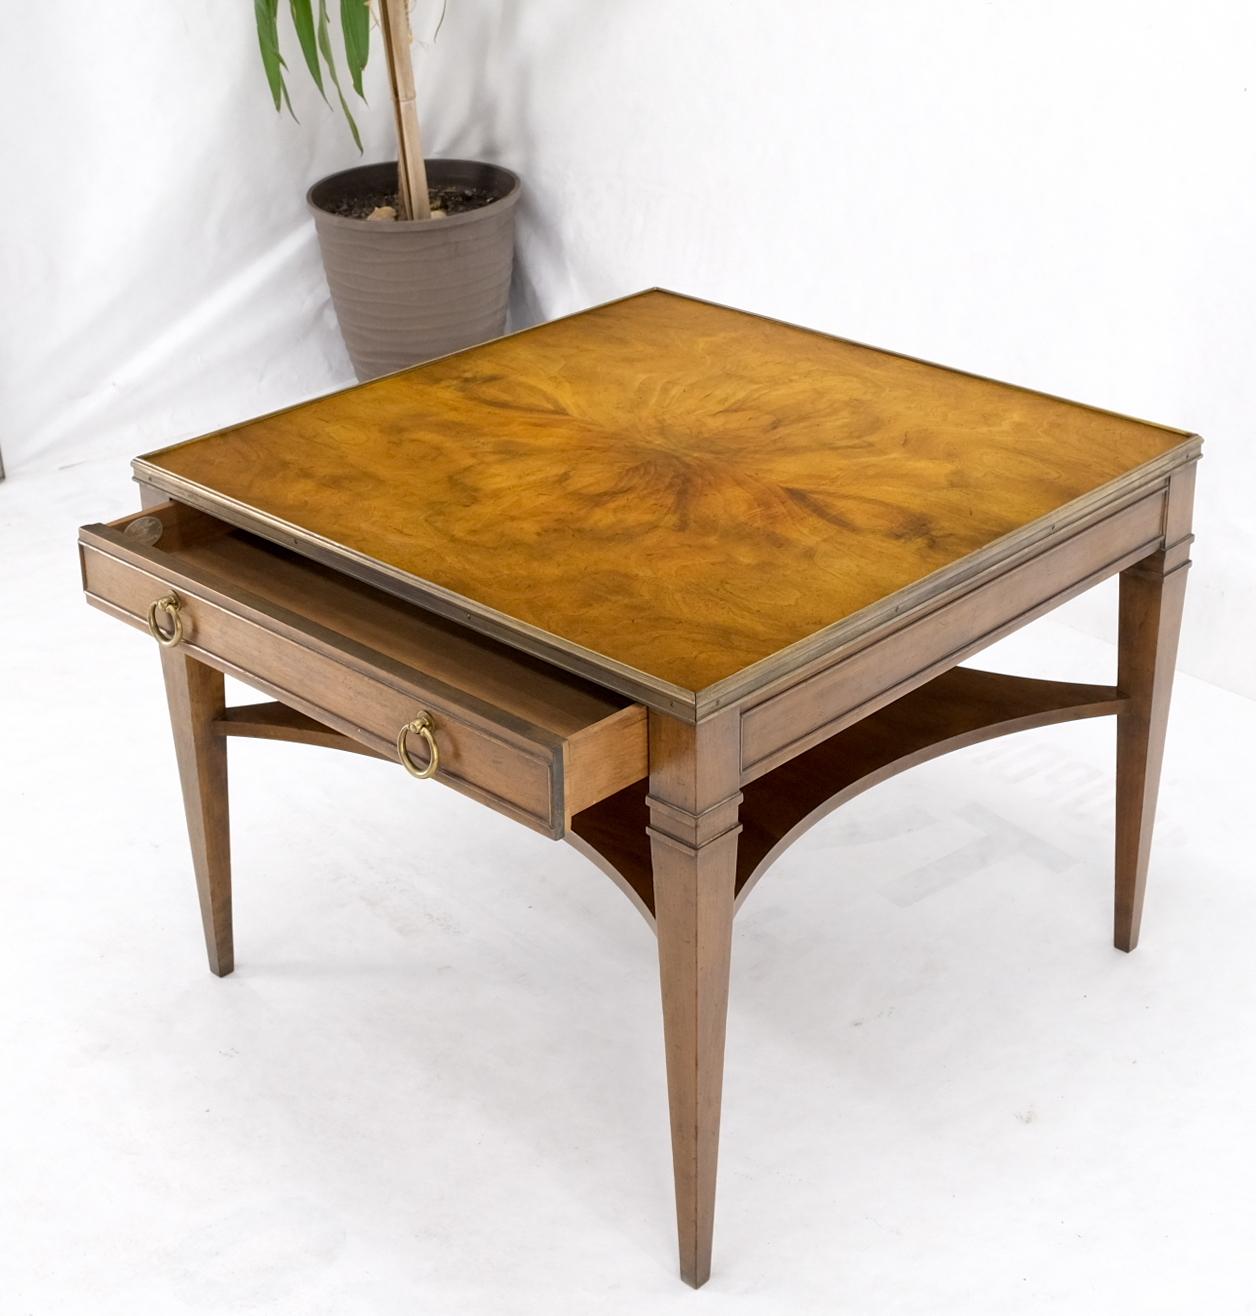 Baker Burl Walnut Square Brass Gallery Top Drawer Side Lamp Table Night Stand In Good Condition For Sale In Rockaway, NJ